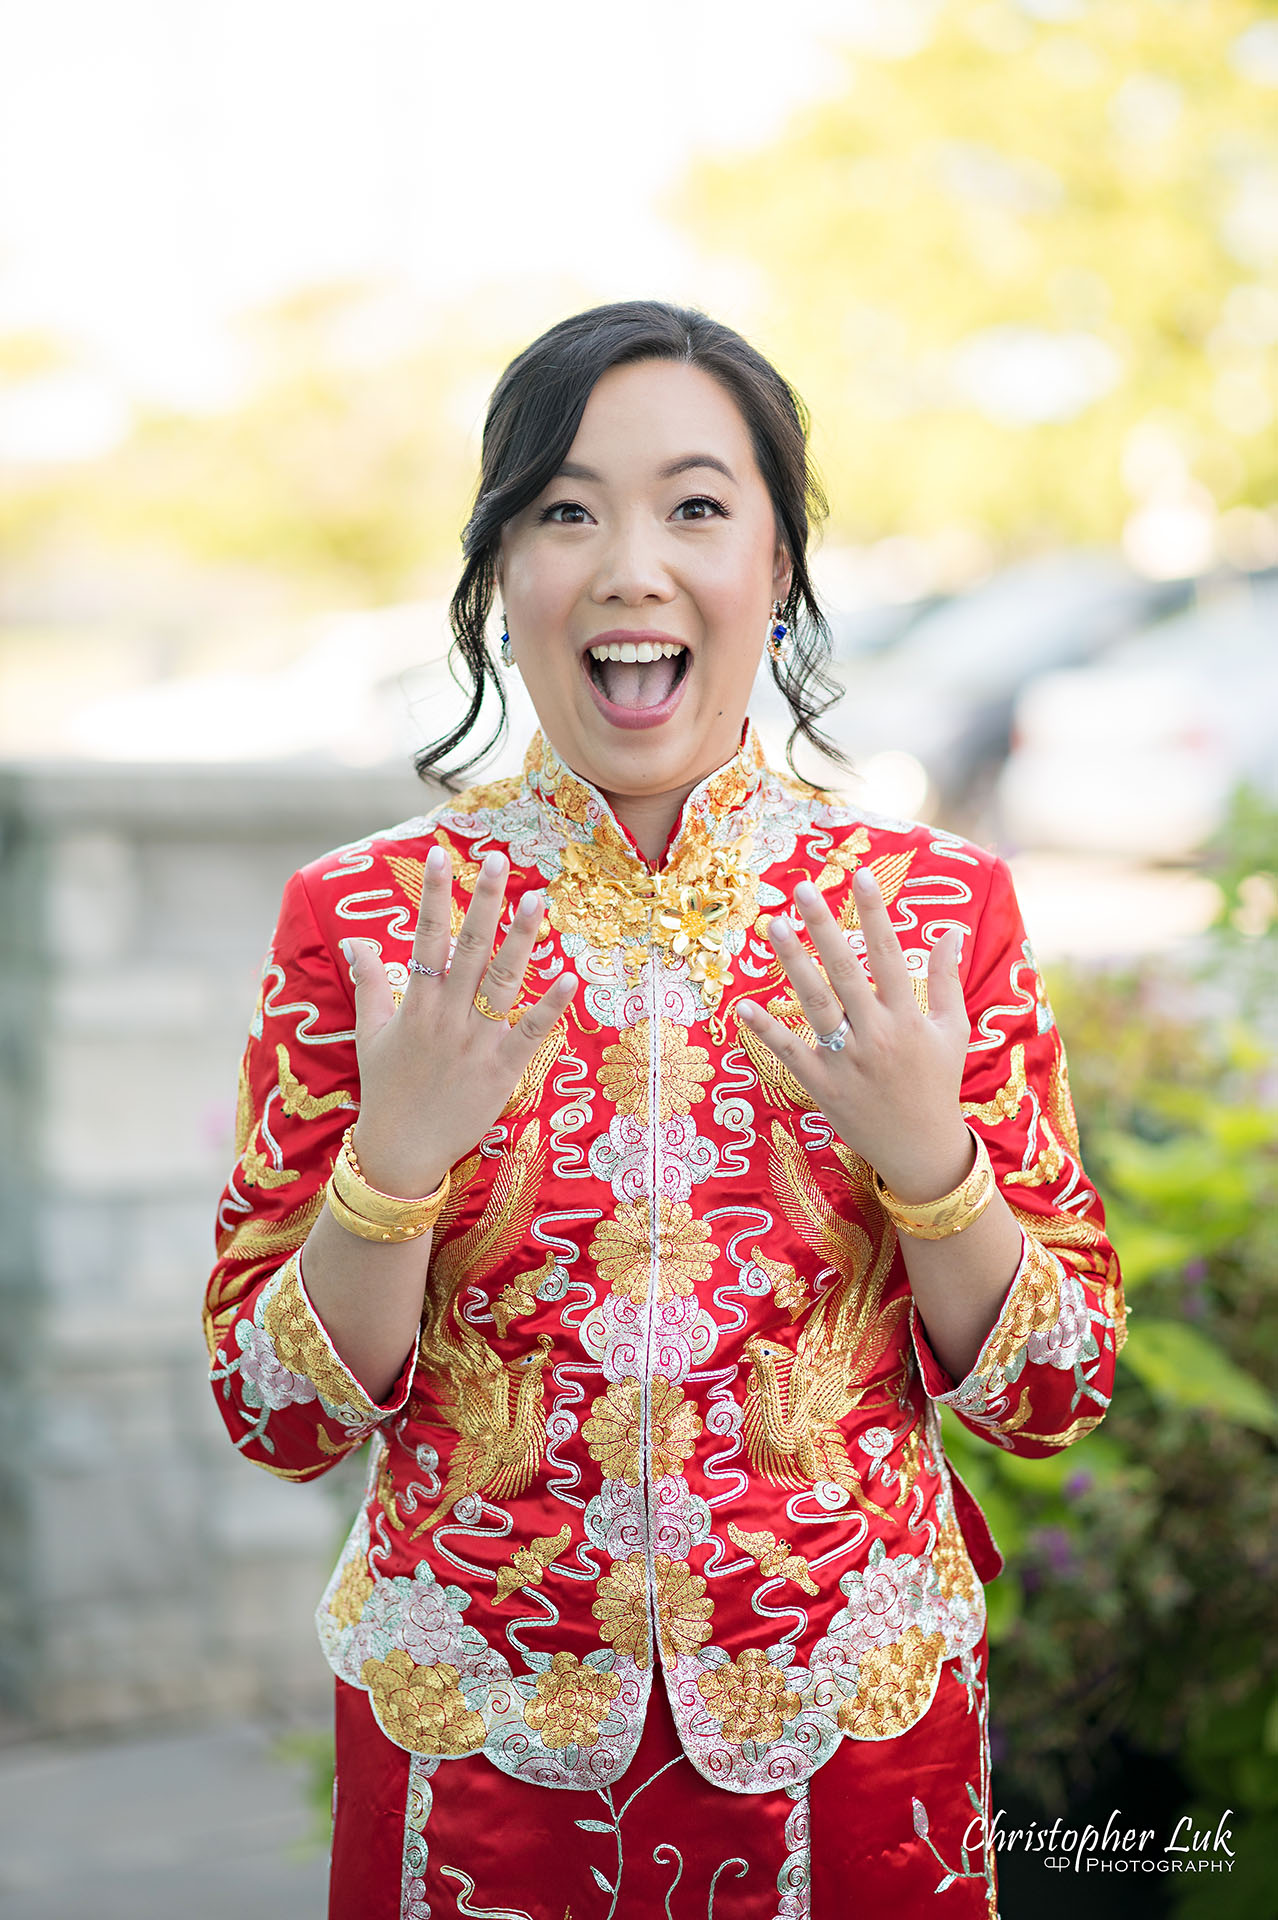 Christopher Luk Toronto Wedding Photographer Bridle Trail Baptist Church Unionville Main Street Crystal Fountain Event Venue Bride Groom Natural Photojournalistic Candid Chinese Tea Ceremony Cheongsam Qipao Kua Qua Gold Jewelry Jewellery Necklace Bracelet Rings Funny Face Smile